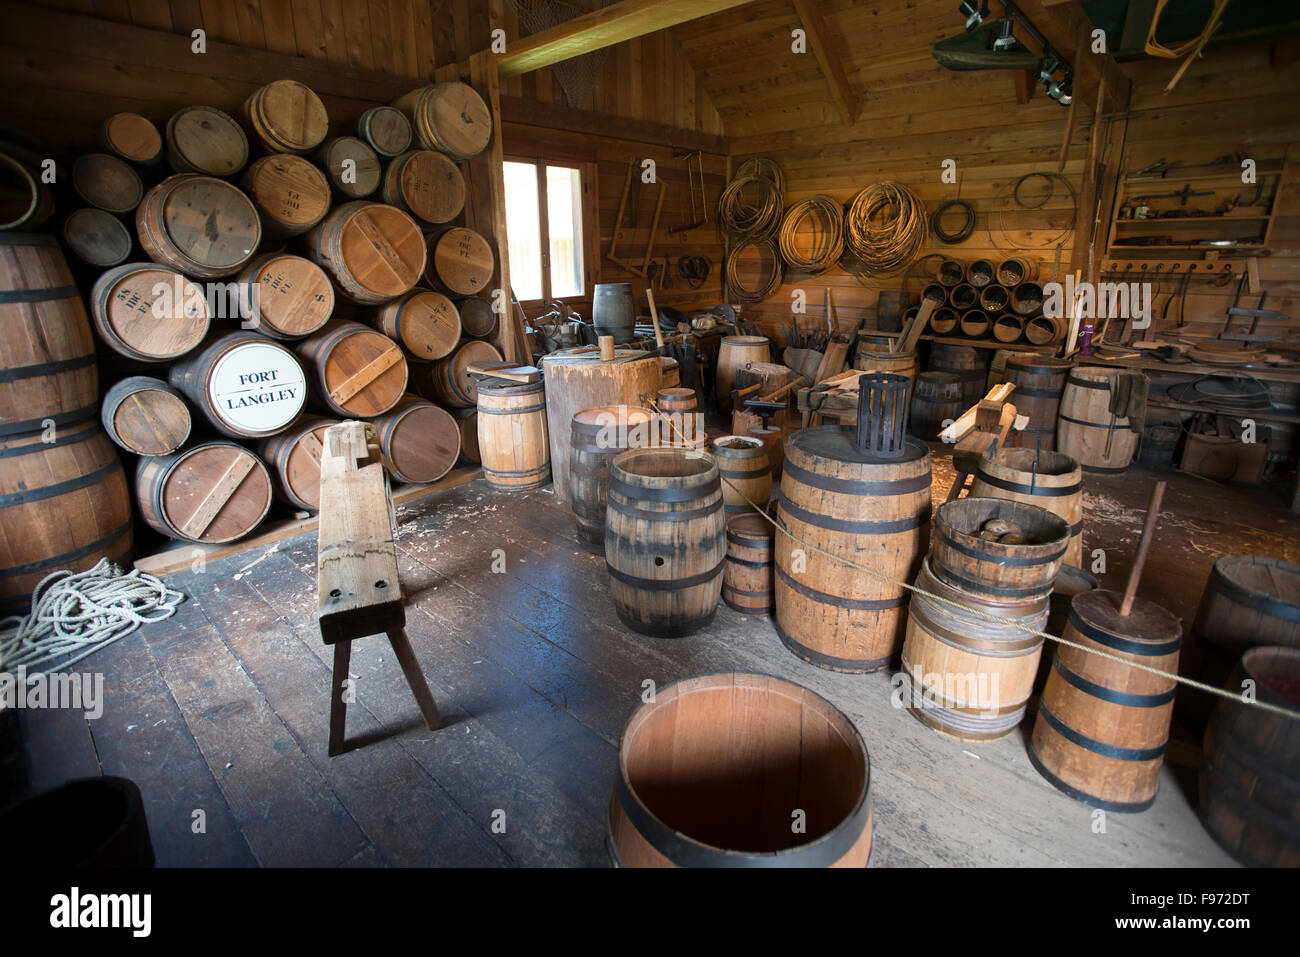 The cooperage at Fort Langley National Historic Site of Canada. Fort Langley, British Columbia, Canada. Stock Photo